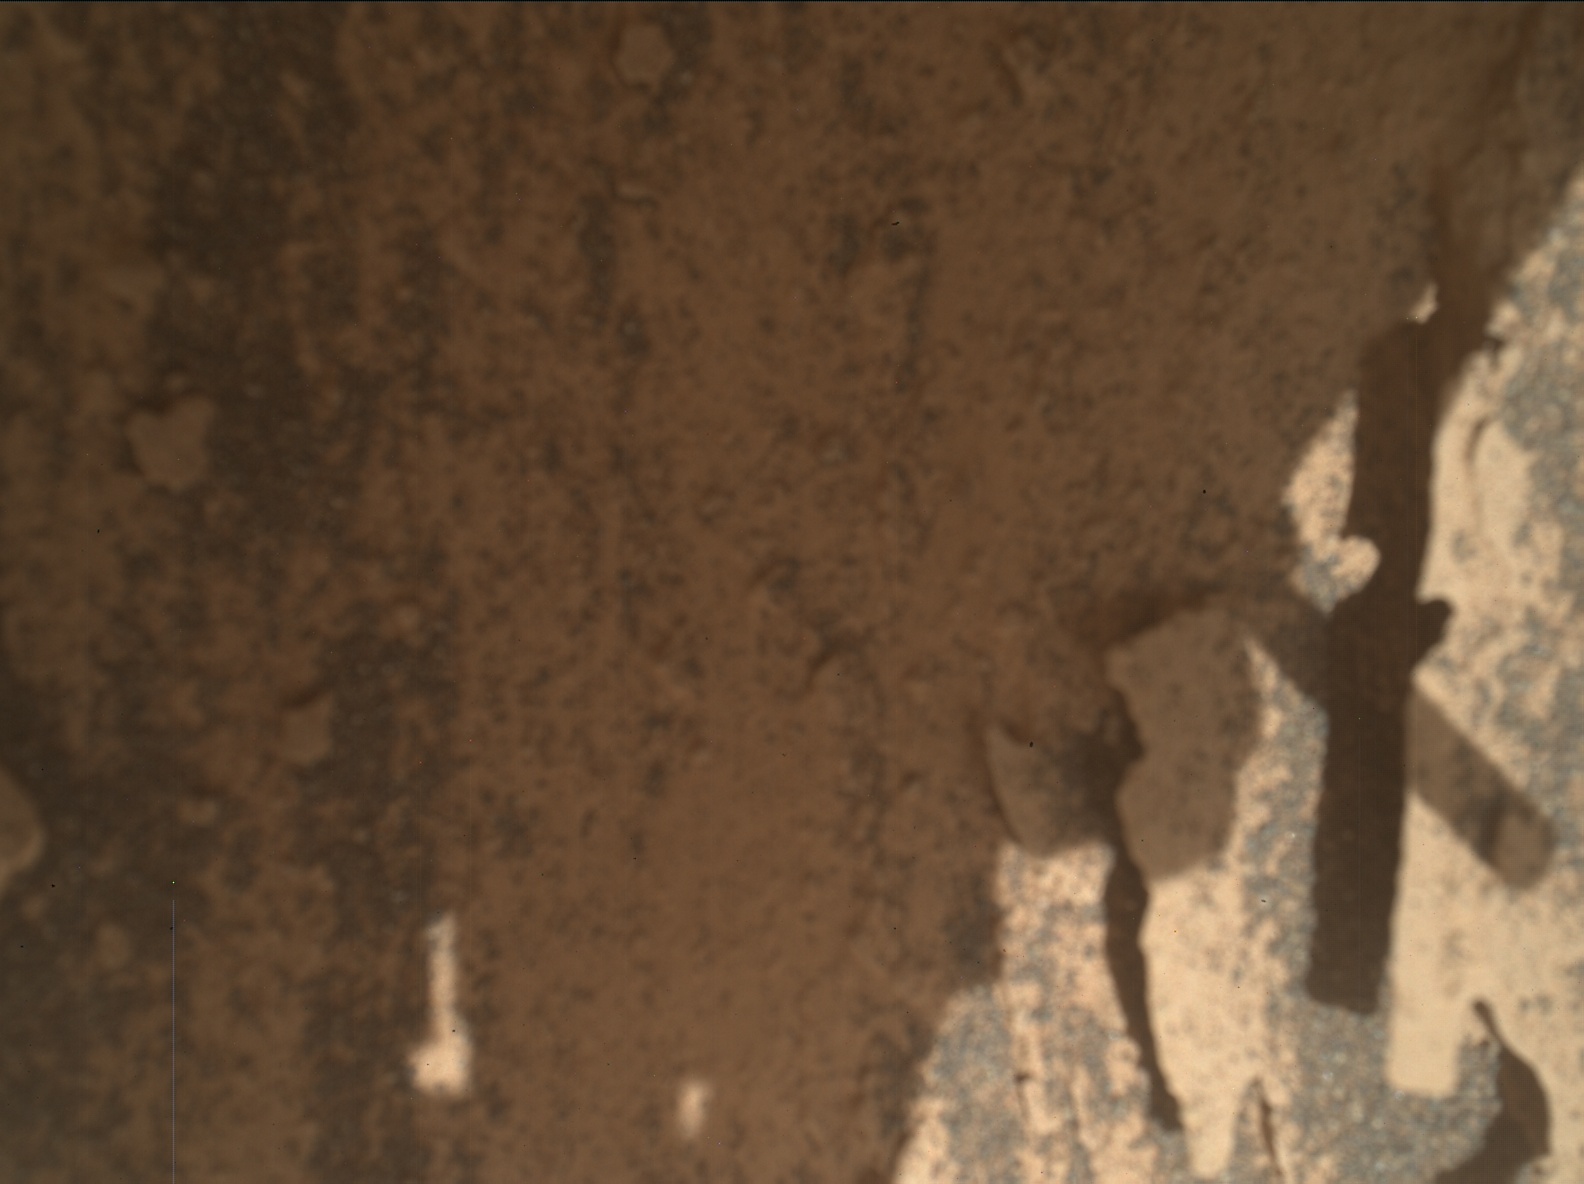 Nasa's Mars rover Curiosity acquired this image using its Mars Hand Lens Imager (MAHLI) on Sol 3326